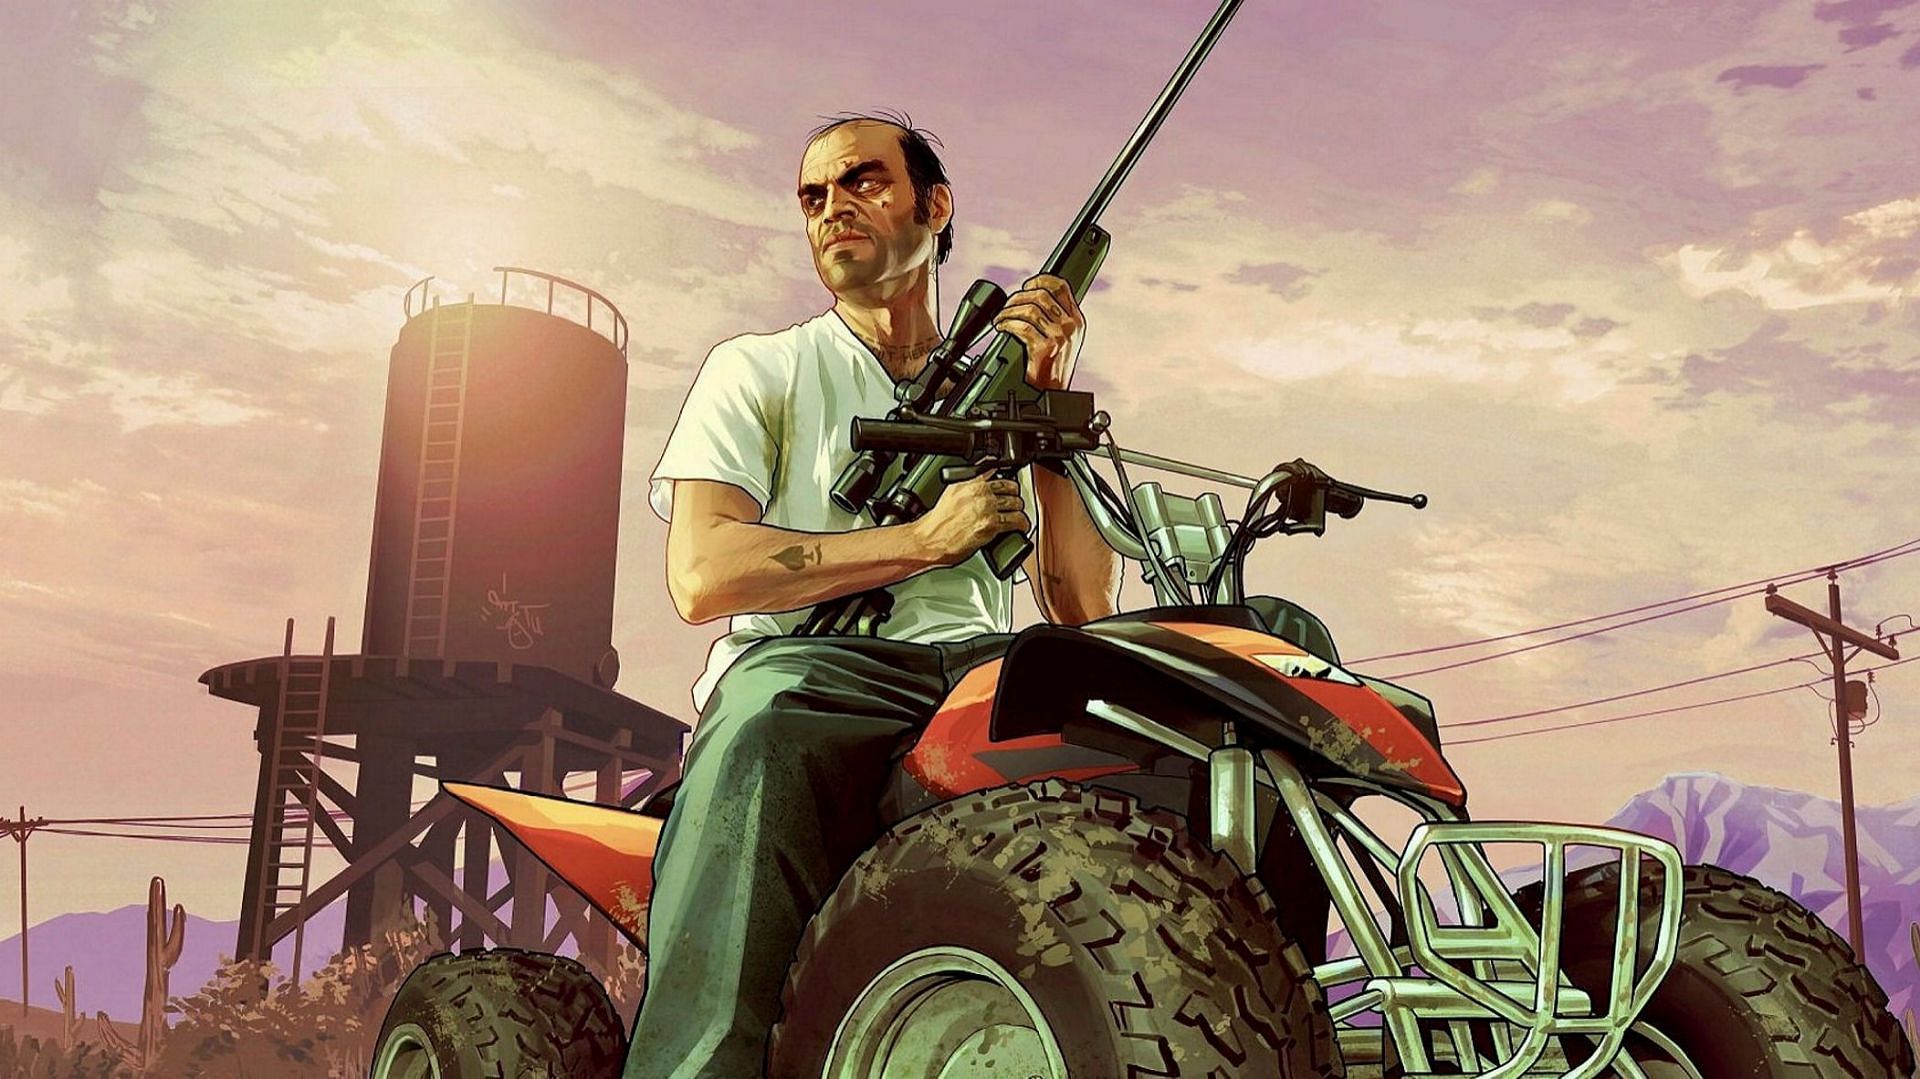 While GTA 5 is not the first major open-world game, it certainly did a lot to shape how those games are developed and approached (Image via Rockstar Games)